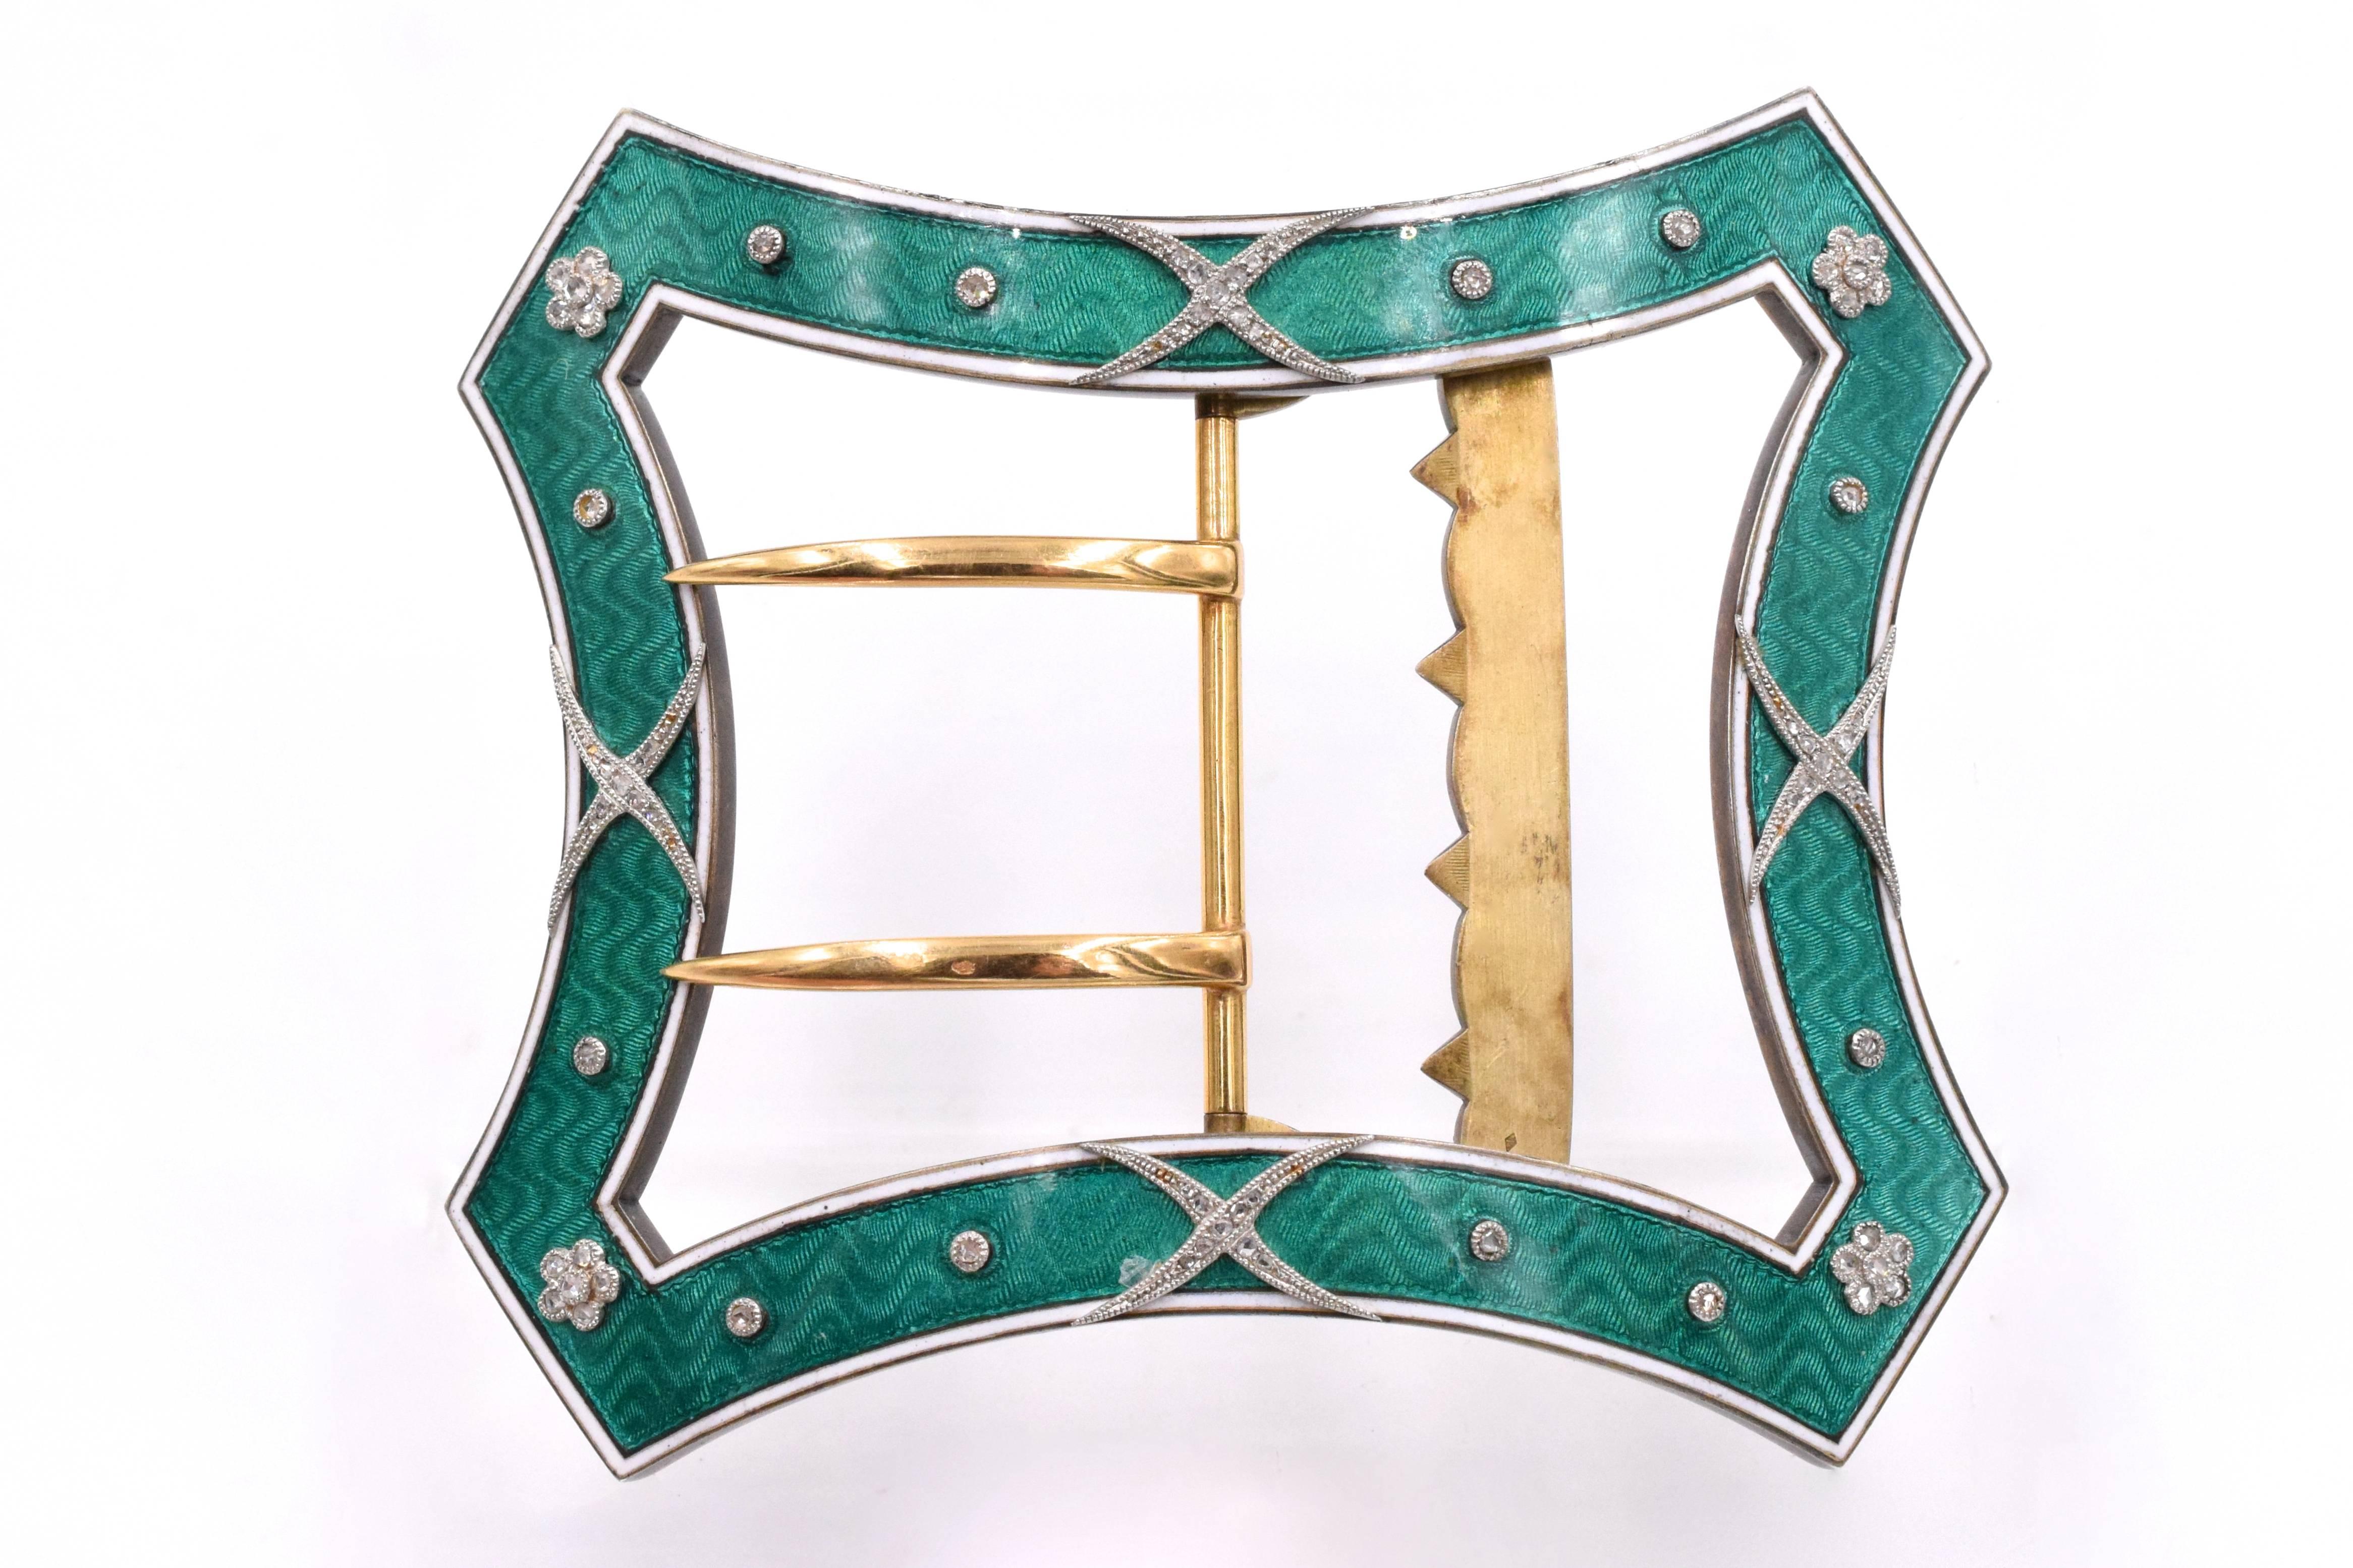 Cartier enamel and diamond belt buckle. French
 The domed rectangular buckle decorated with green guilloché enamel and white enamel borders, set with rose-cut diamond flower-head, cross-shaped and collet accents, 9.0 cm, with French marks for gold